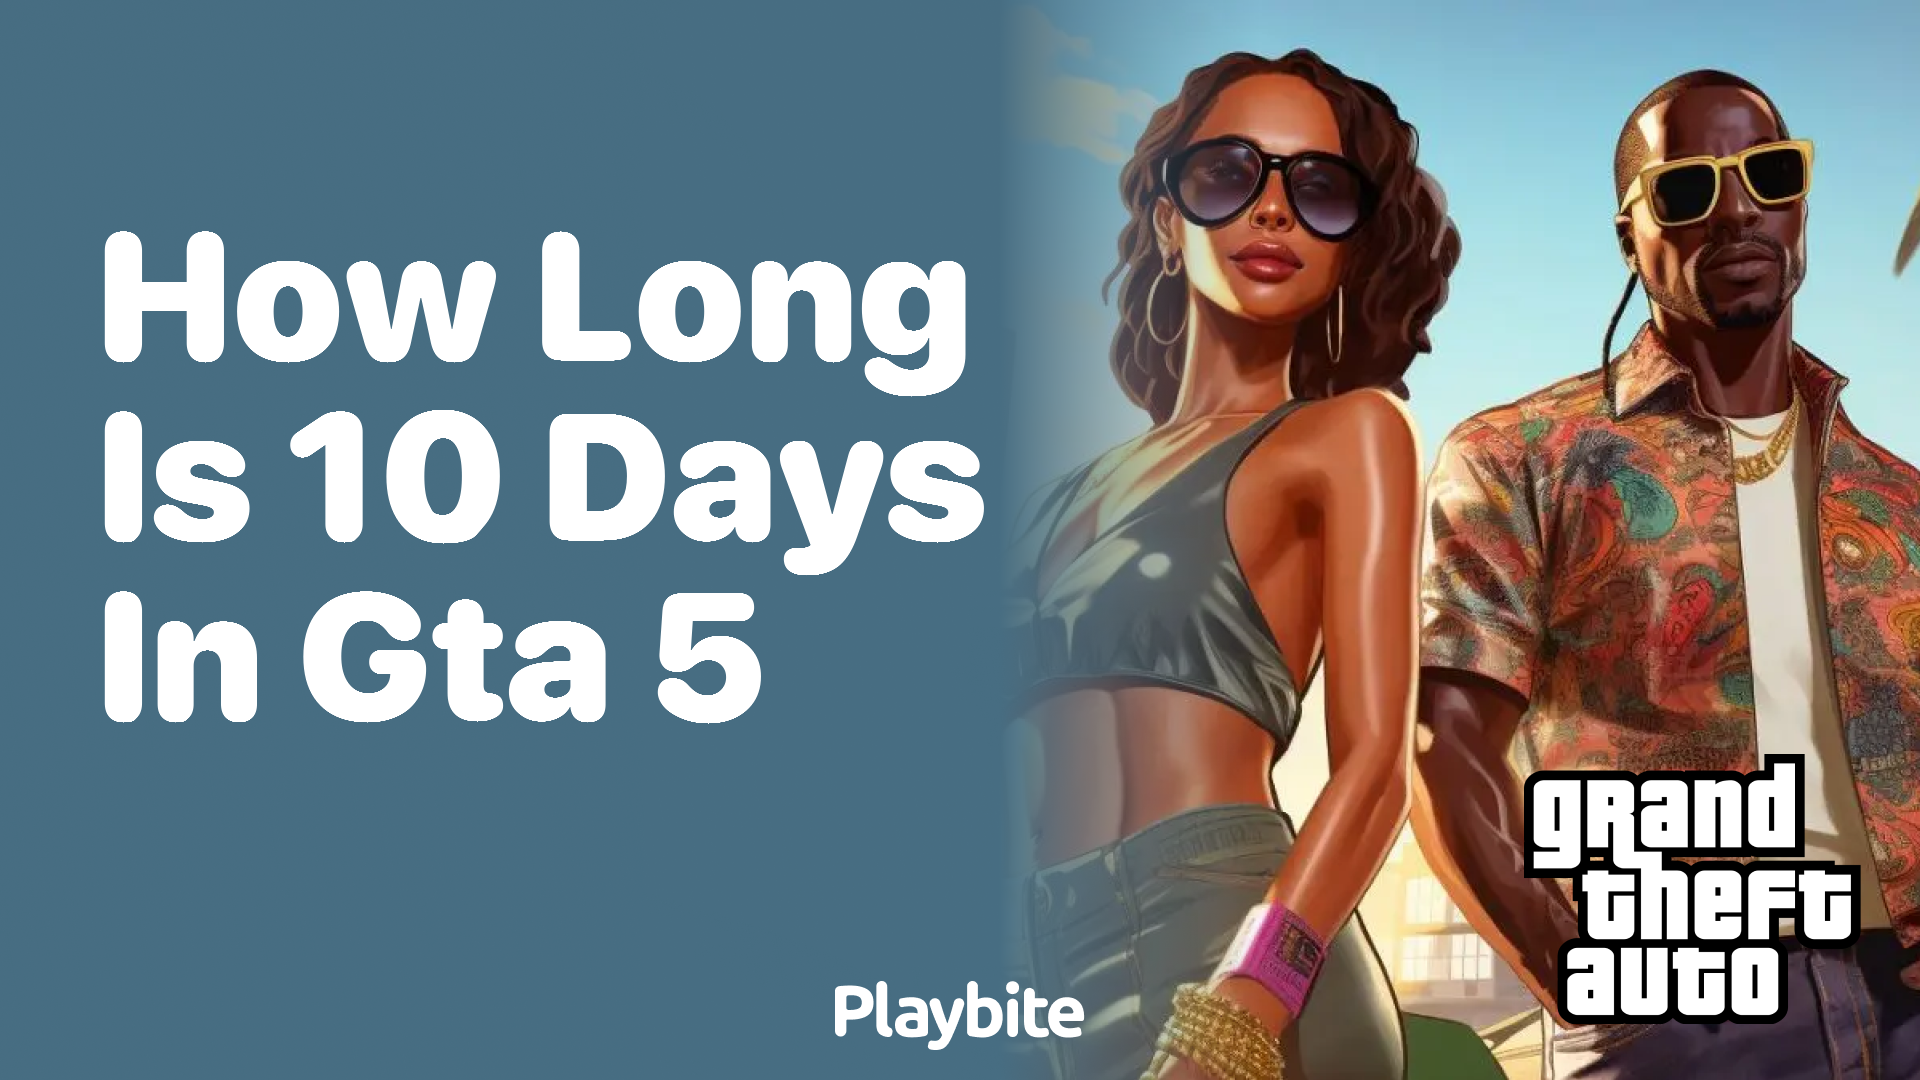 How long is 10 GTA Days in real life?